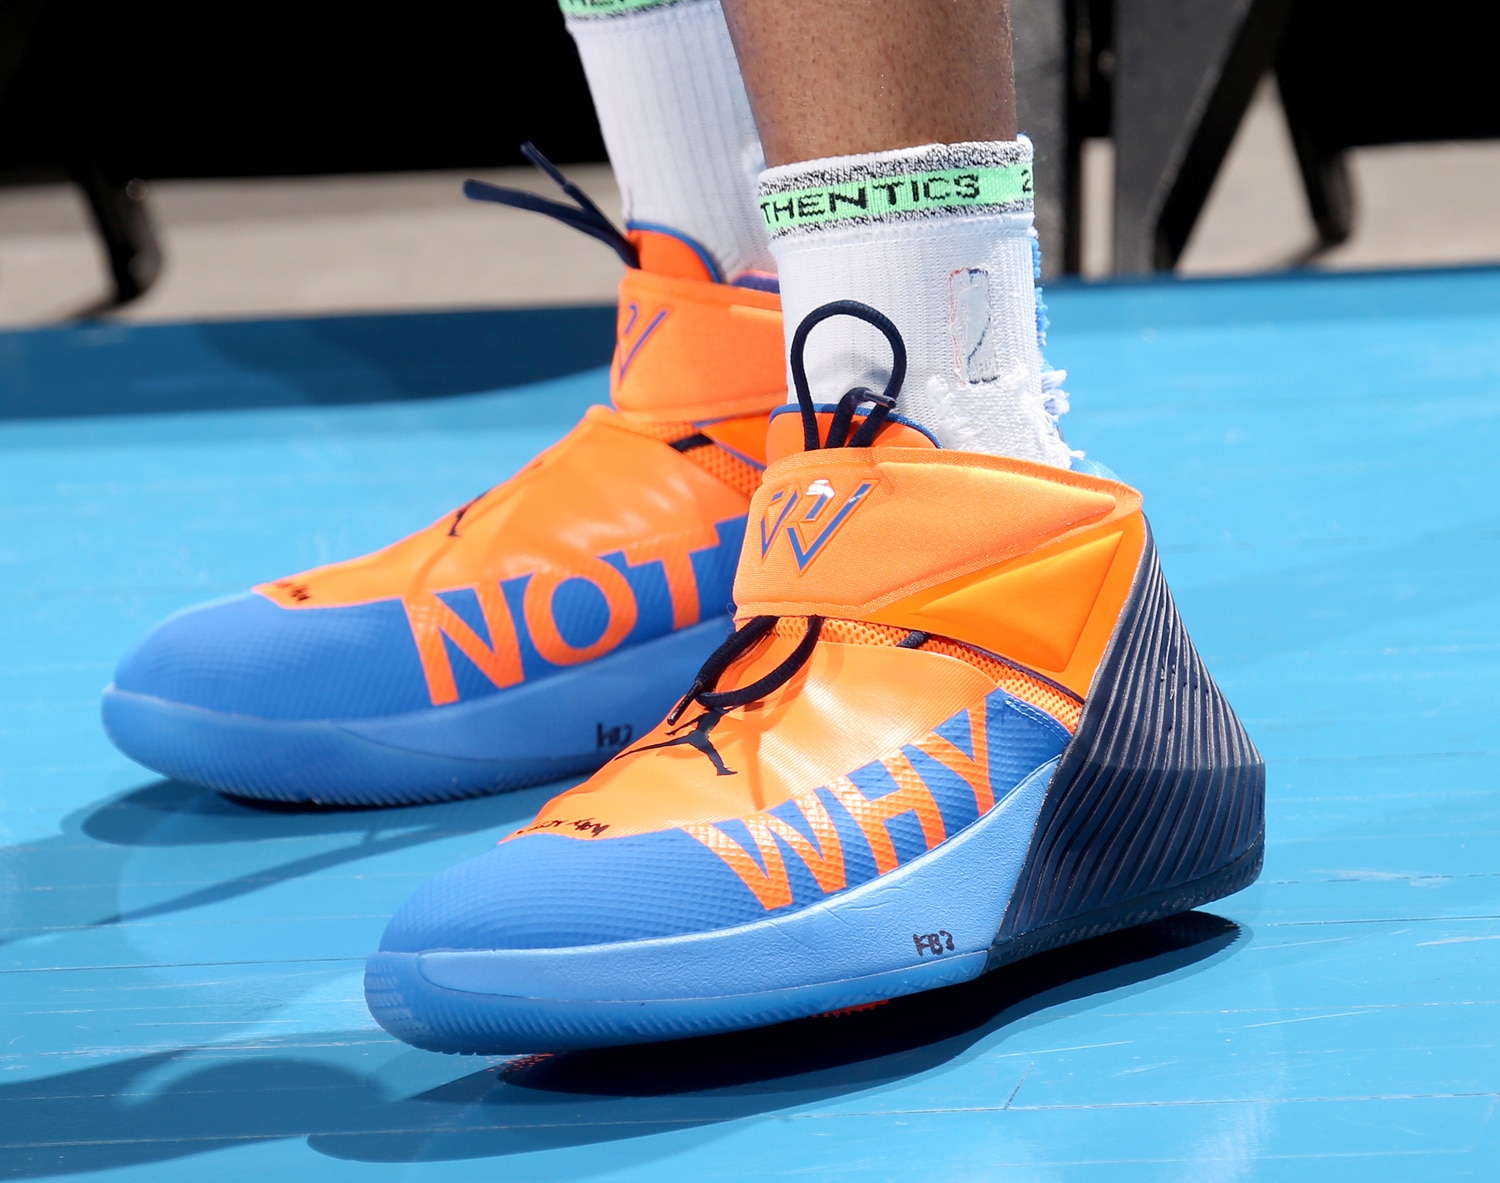 westbrook playoff shoes